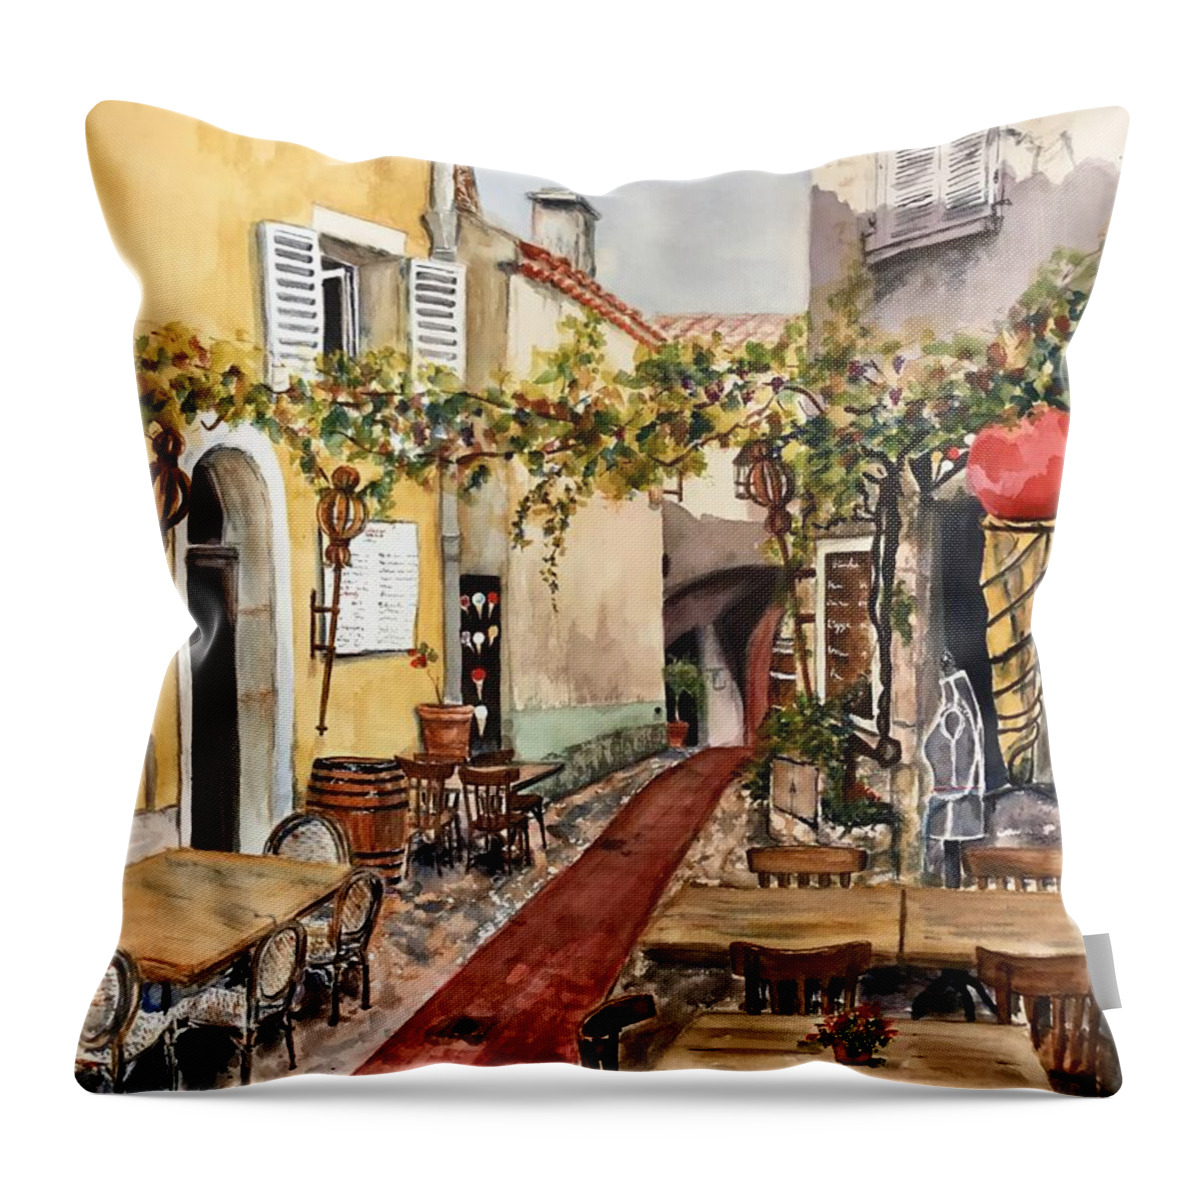 Grape Vines Throw Pillow featuring the painting Ete en Eze #1 by Sonia Mocnik